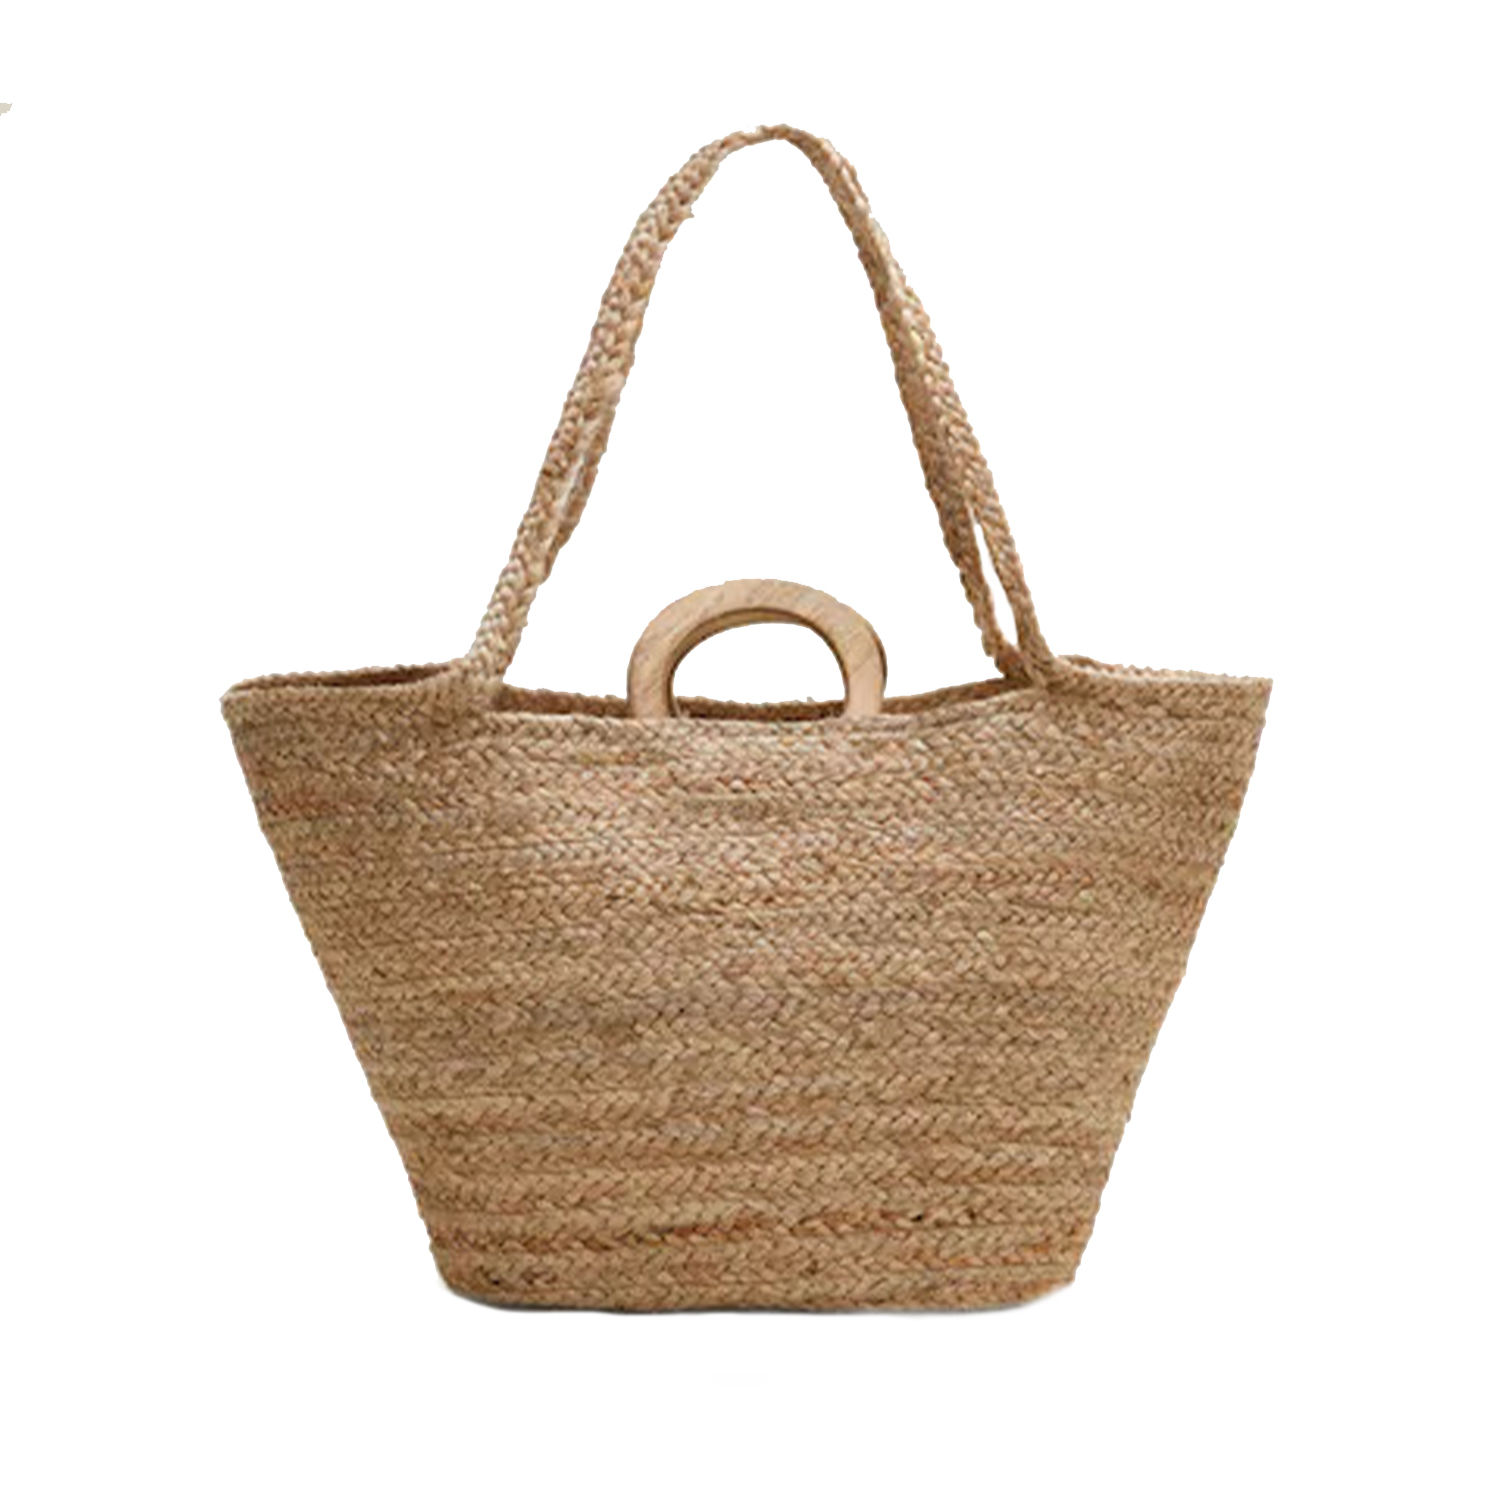 Boaat Shaped Easy to Carry Jute Basket | Hand Made Jute Basket Bag with ...